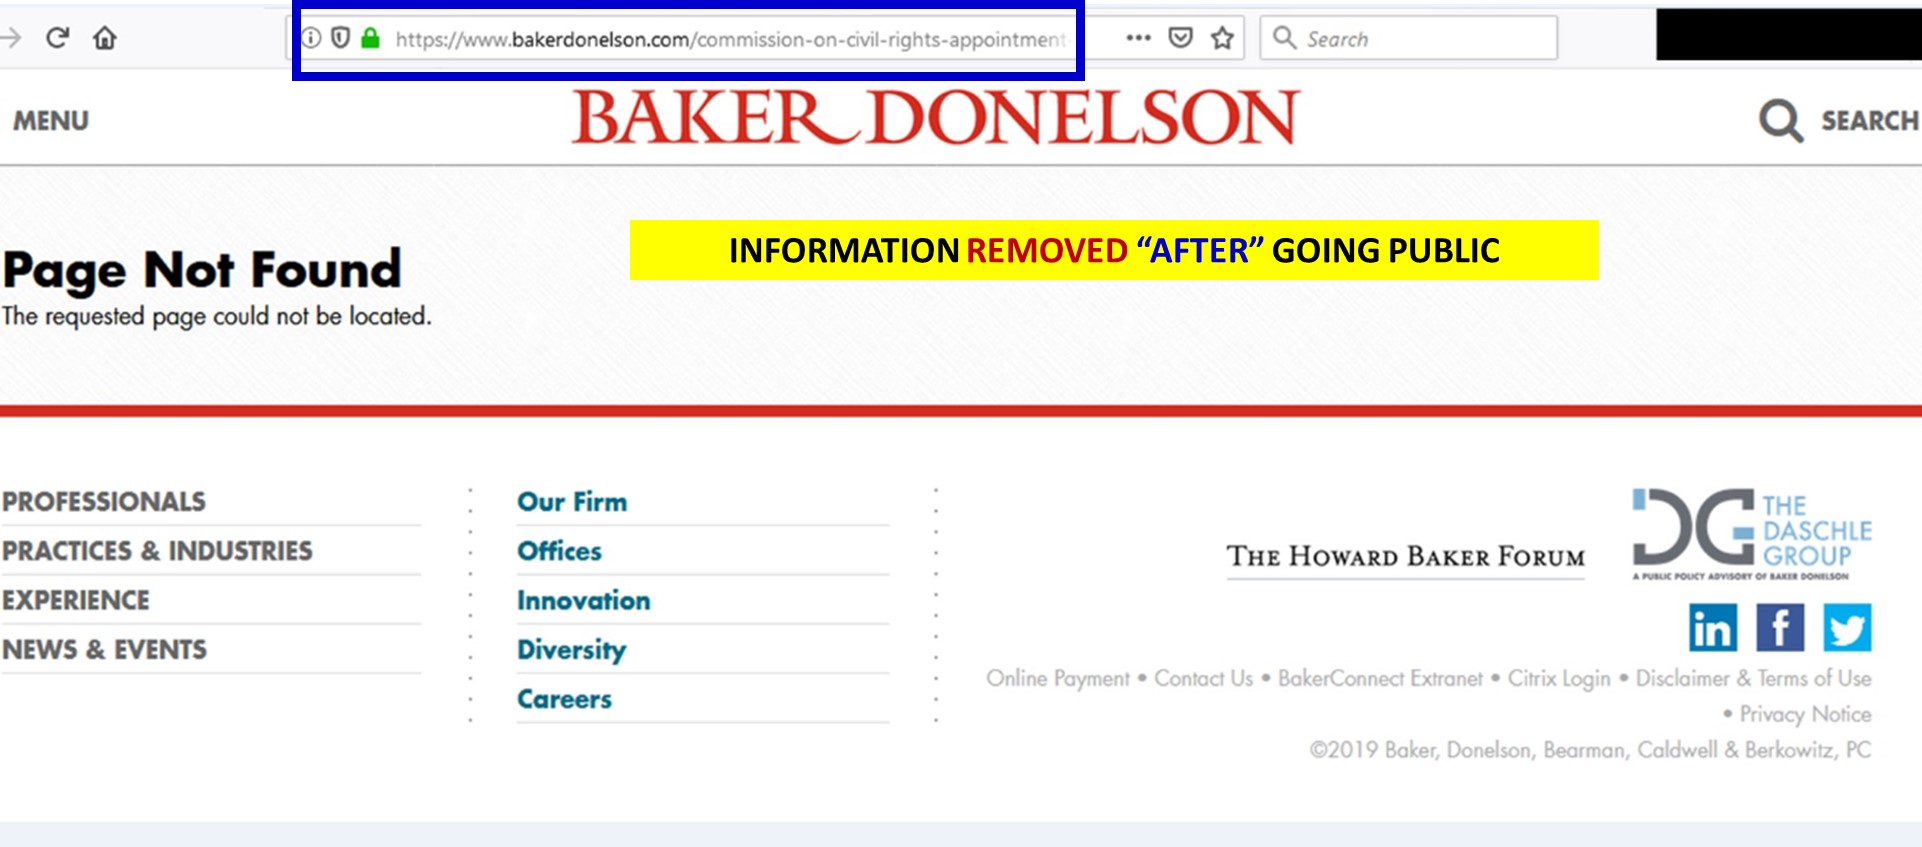 BAKER DONELSON REMOVAL Of United States Commission On Civil Rights